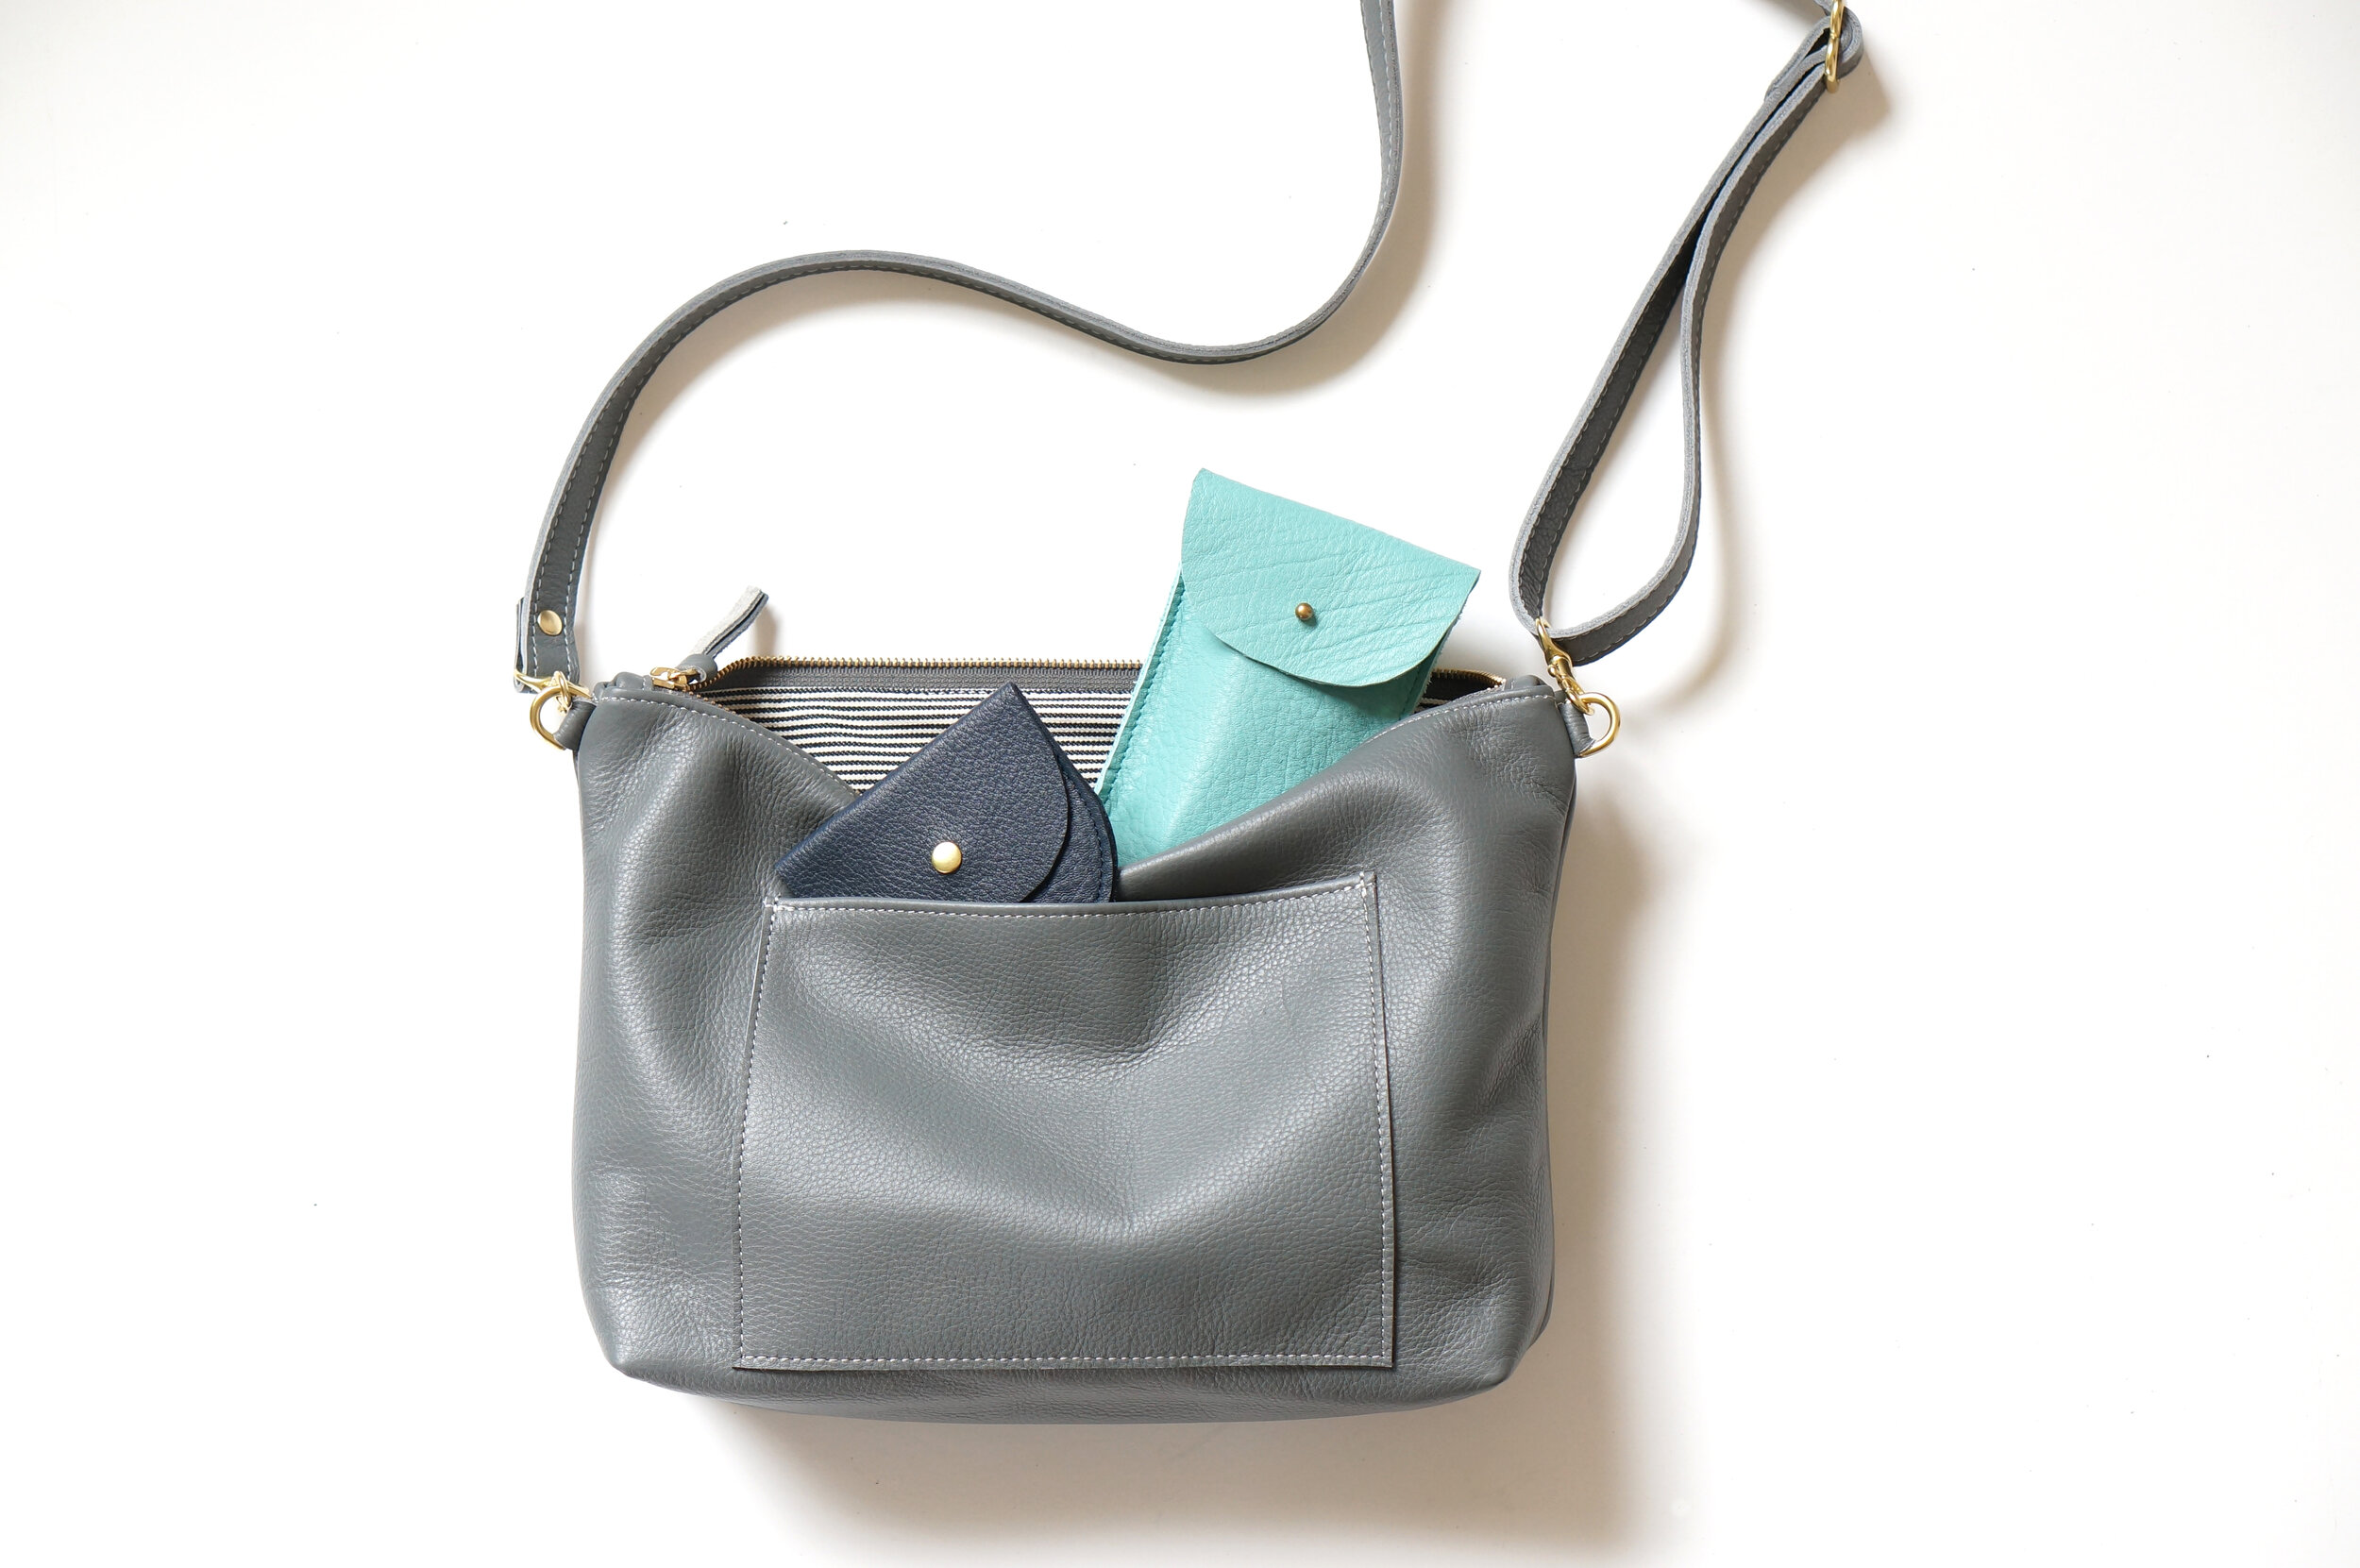 Umbrella Collective | Leather Bags, Leather Goods, Handmade in Portland ...